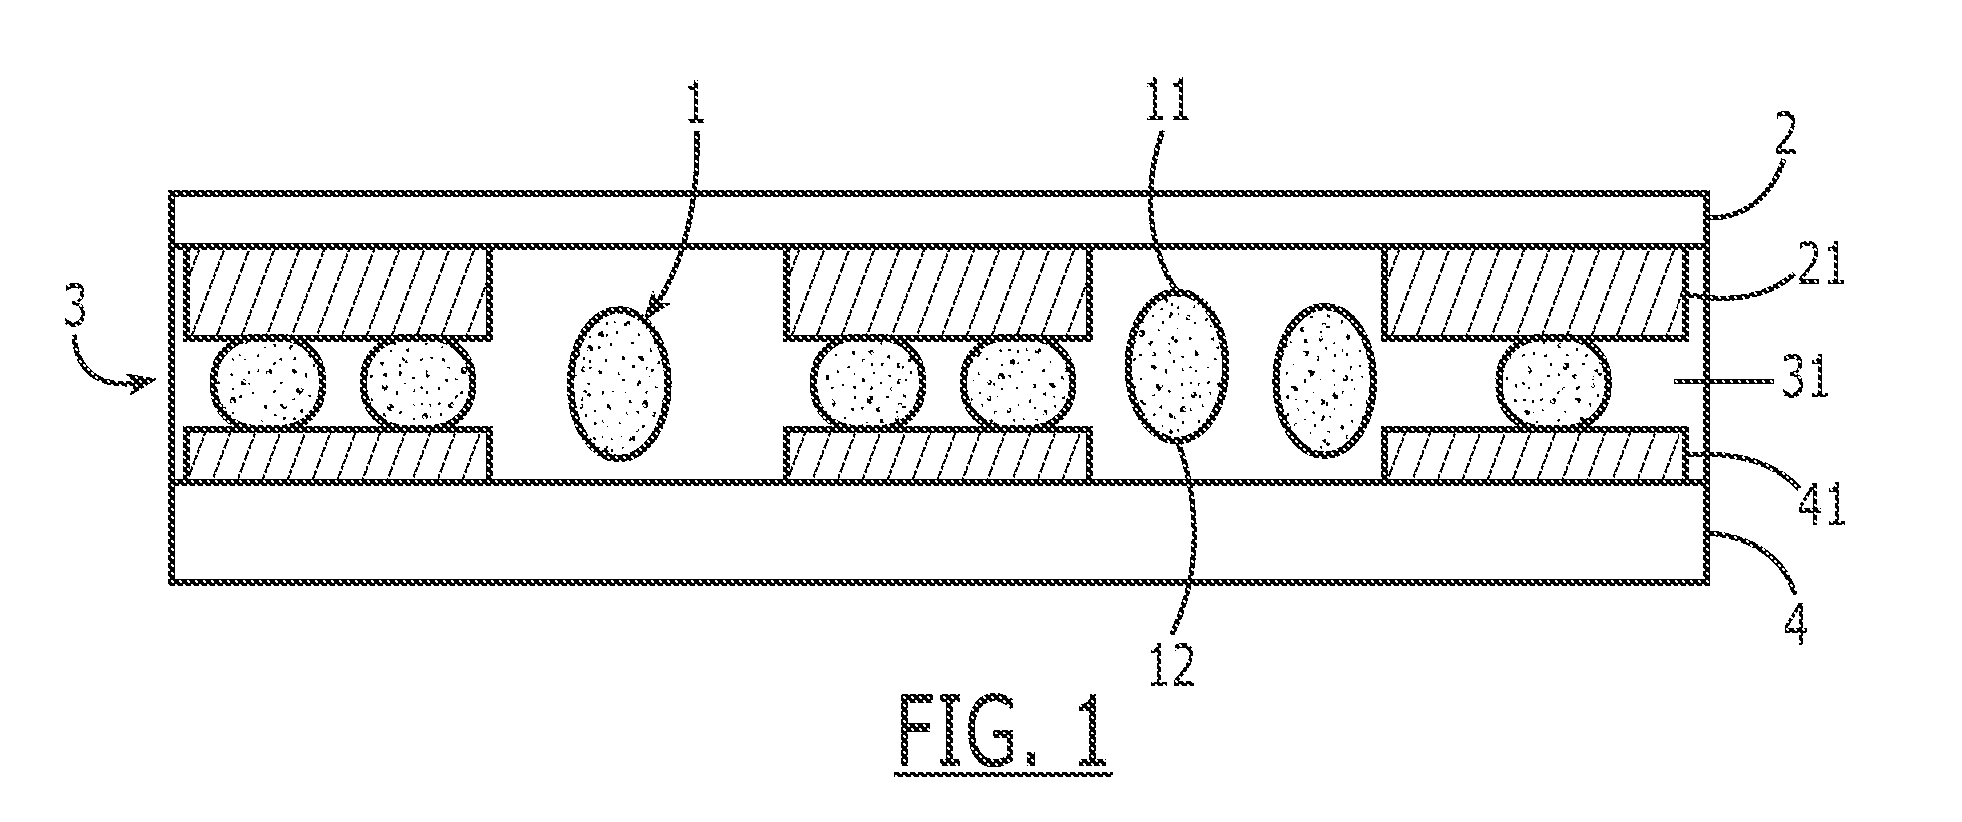 Polymer Particles, Conductive Particles, and an Anisotropic Conductive Packaging Materials Containing the Same